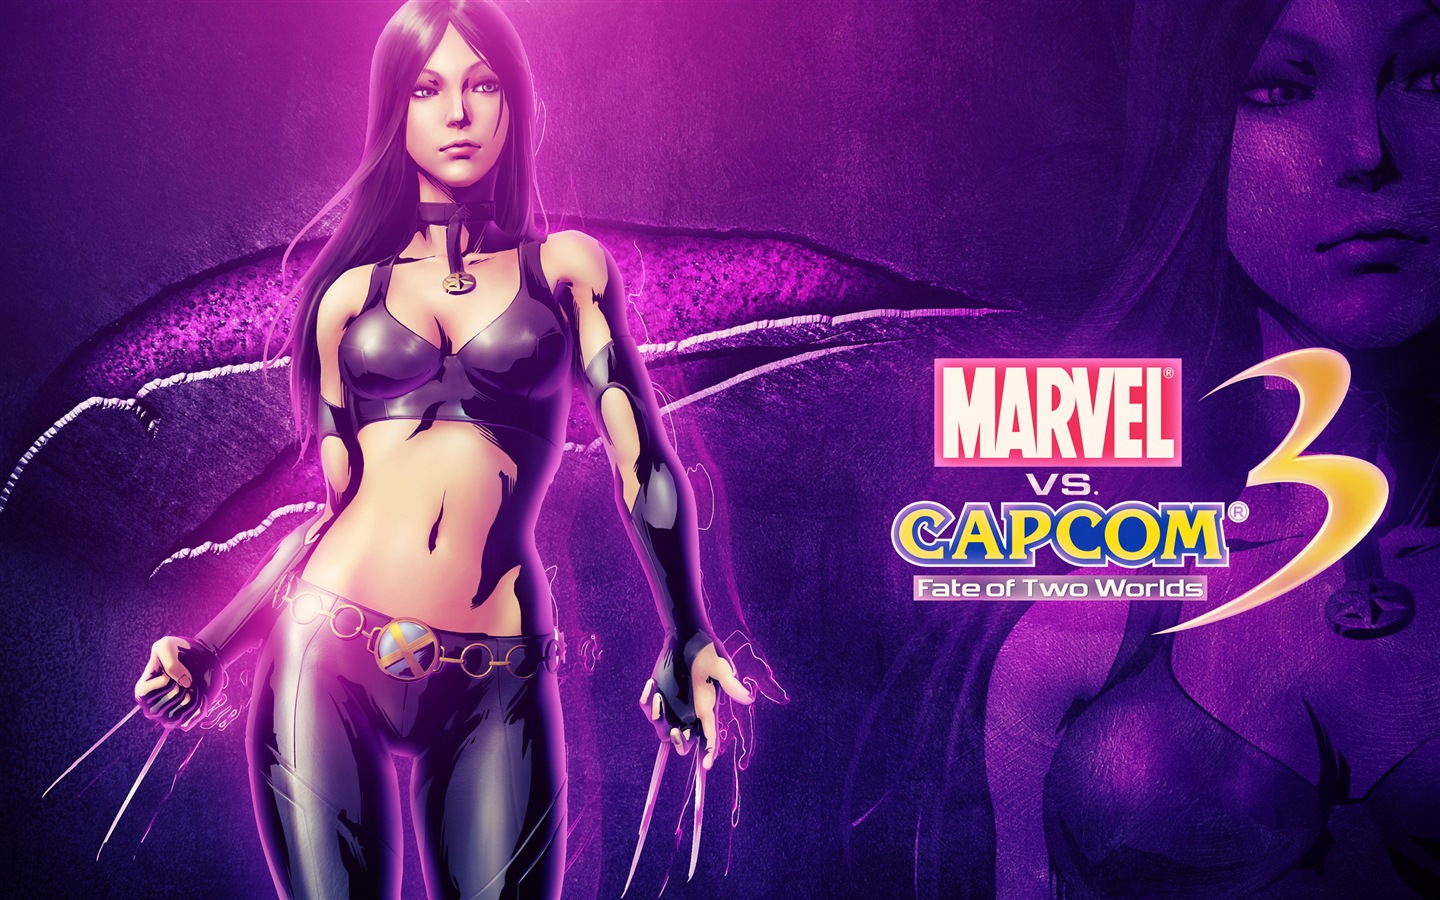 Marvel VS. Capcom 3: Fate of Two Worlds HD game wallpapers #10 - 1440x900